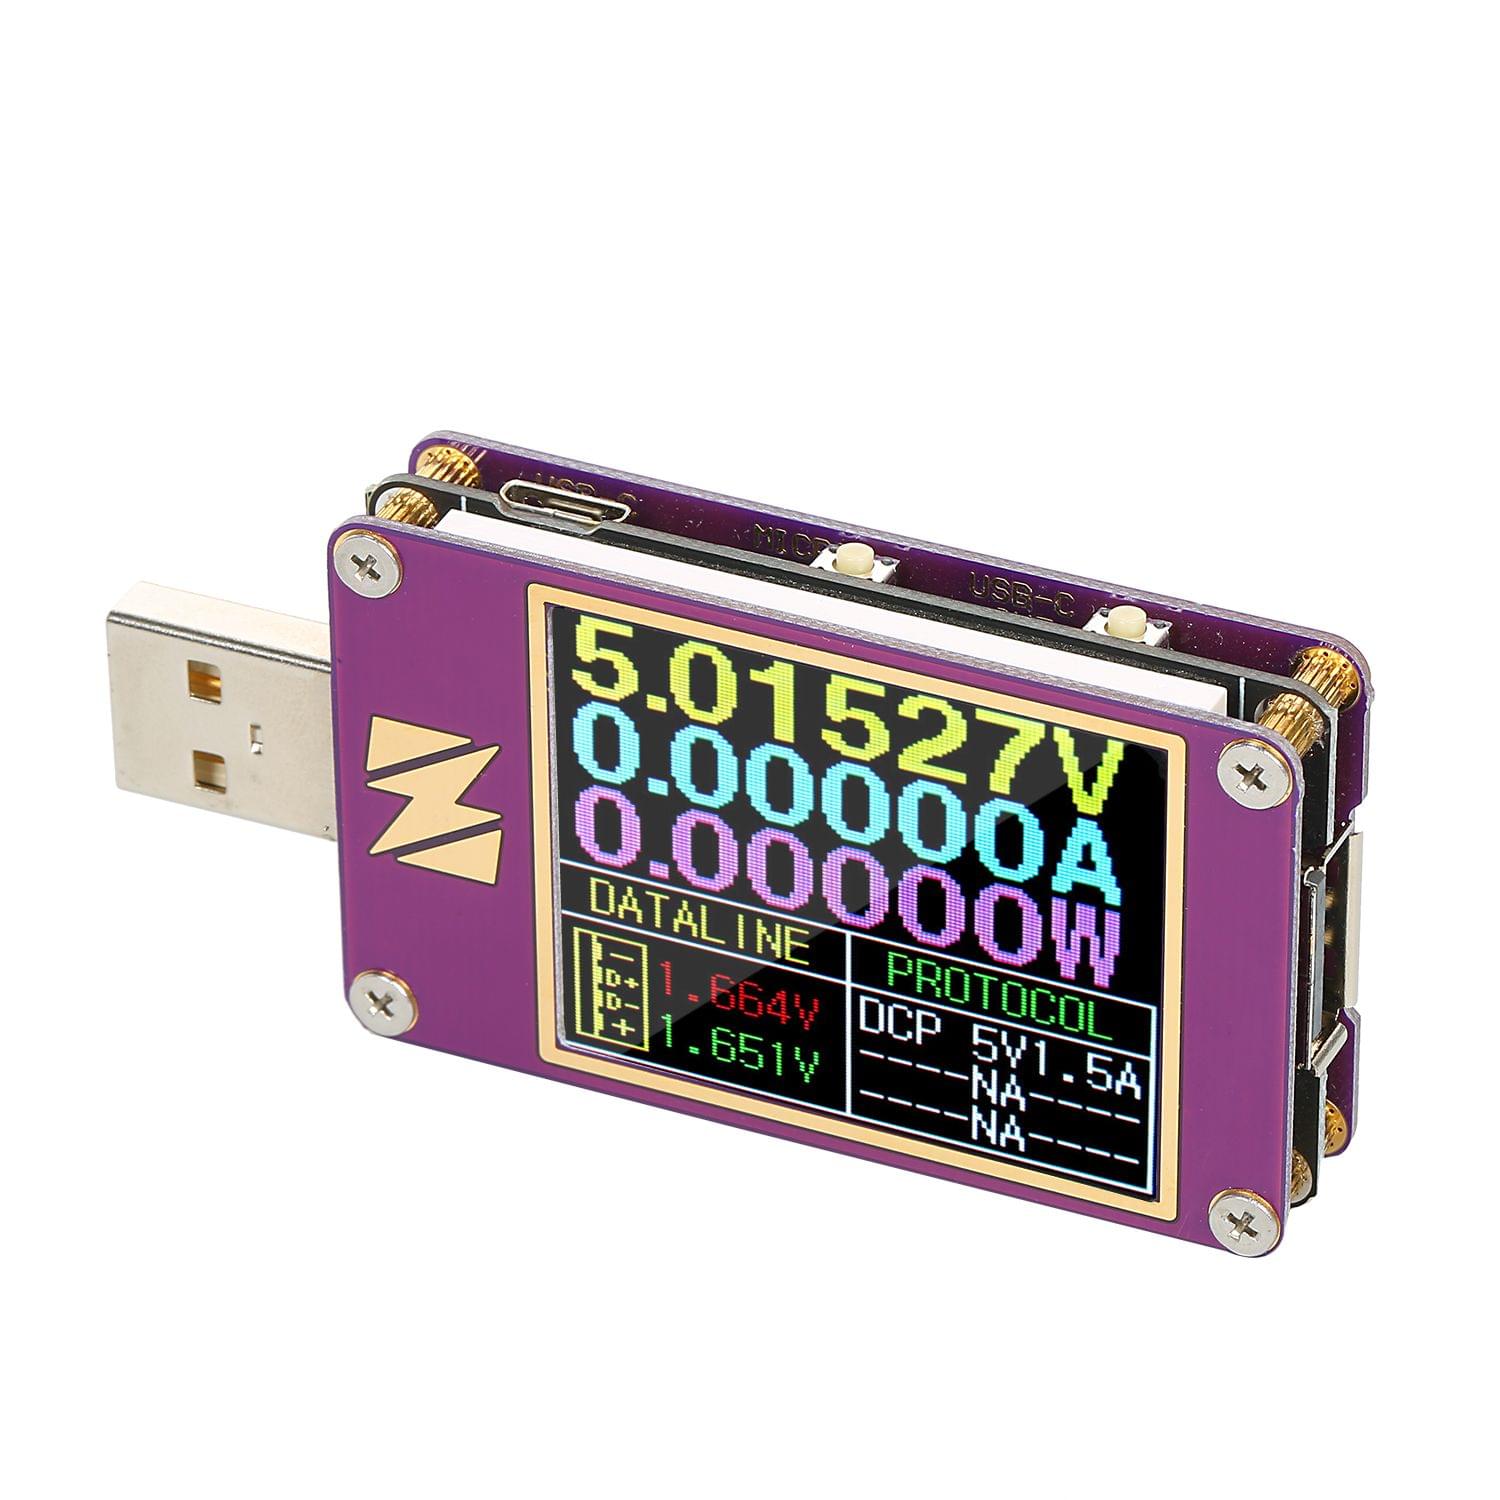 ZY1280P USB Tester Digital Display Color Screen Current